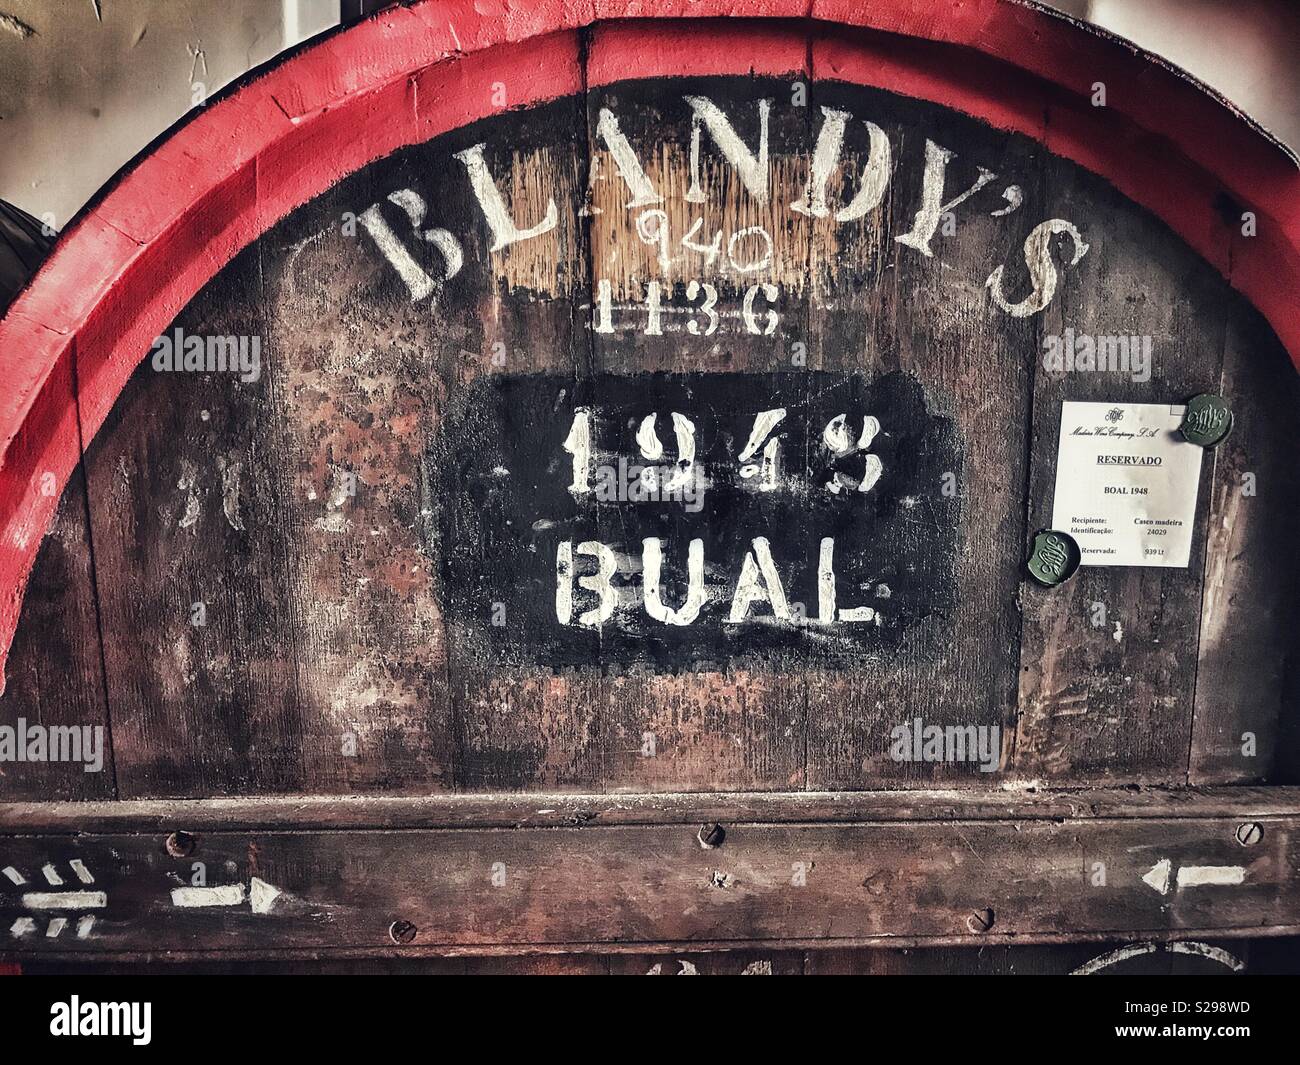 Blandy’ Wine Lodge Tour: Wine ageing in a barrel, Bual 1948, Blandy’s  Wine Lodge, Funchal, Madeira, Portugal Stock Photo